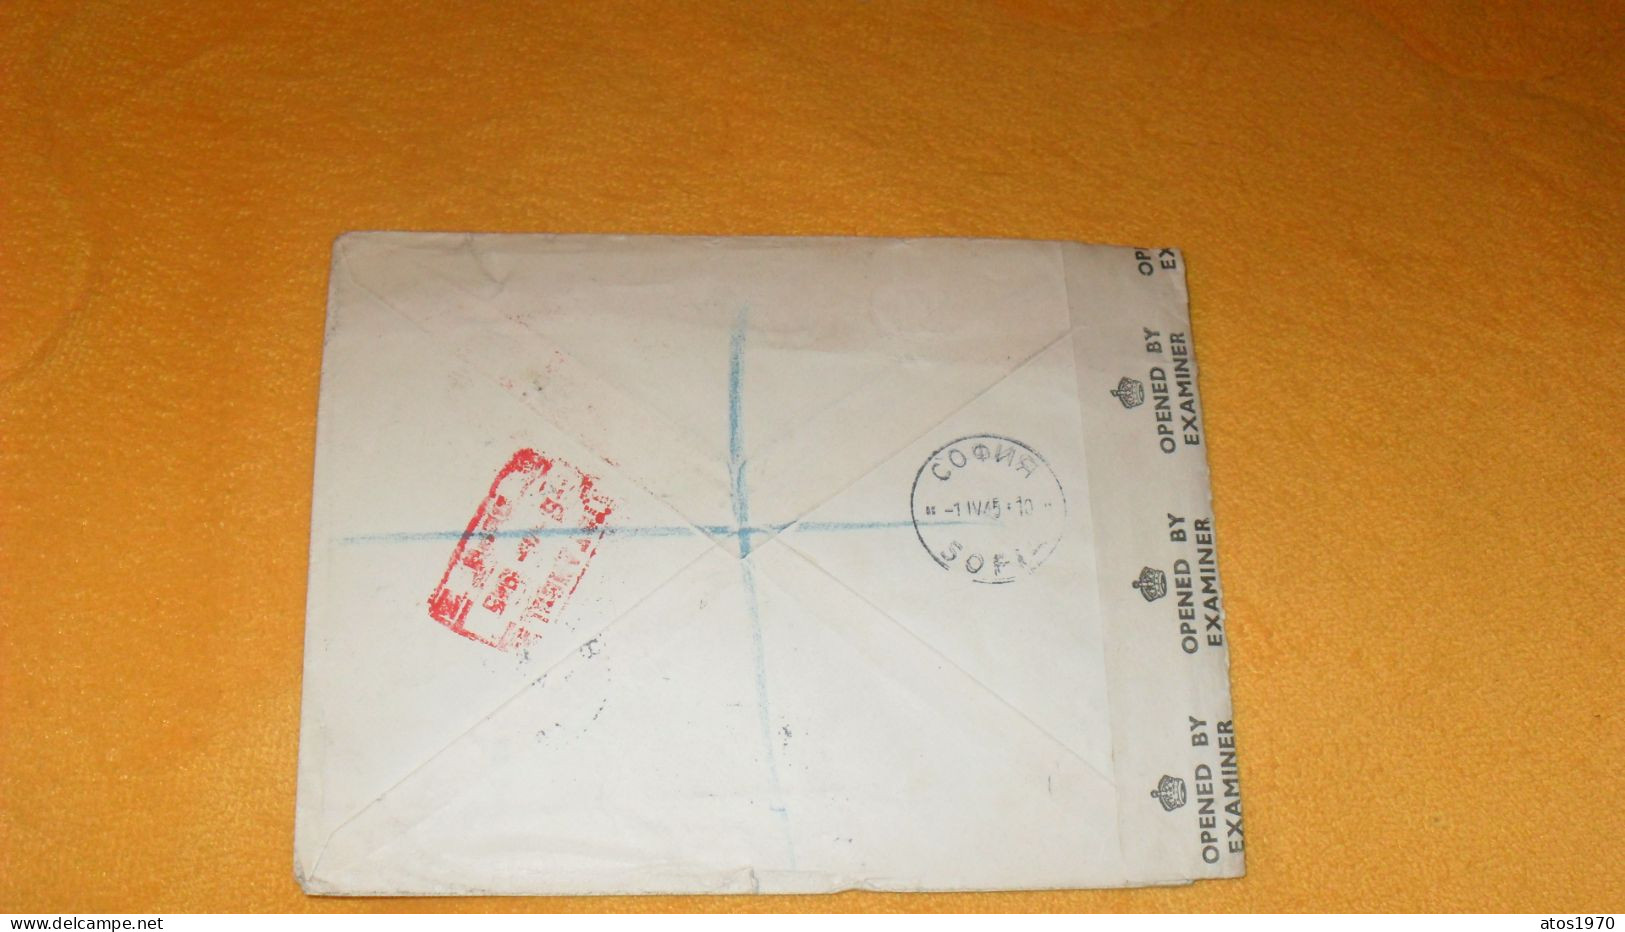 ENVELOPPE ANCIENNE DE 1945../ GEORGES T. PETROFF & CIE IMPORTATION...VARNA BULGARIE OPENED BY EXA..CACHETS + TIMBRES X3 - Briefe U. Dokumente